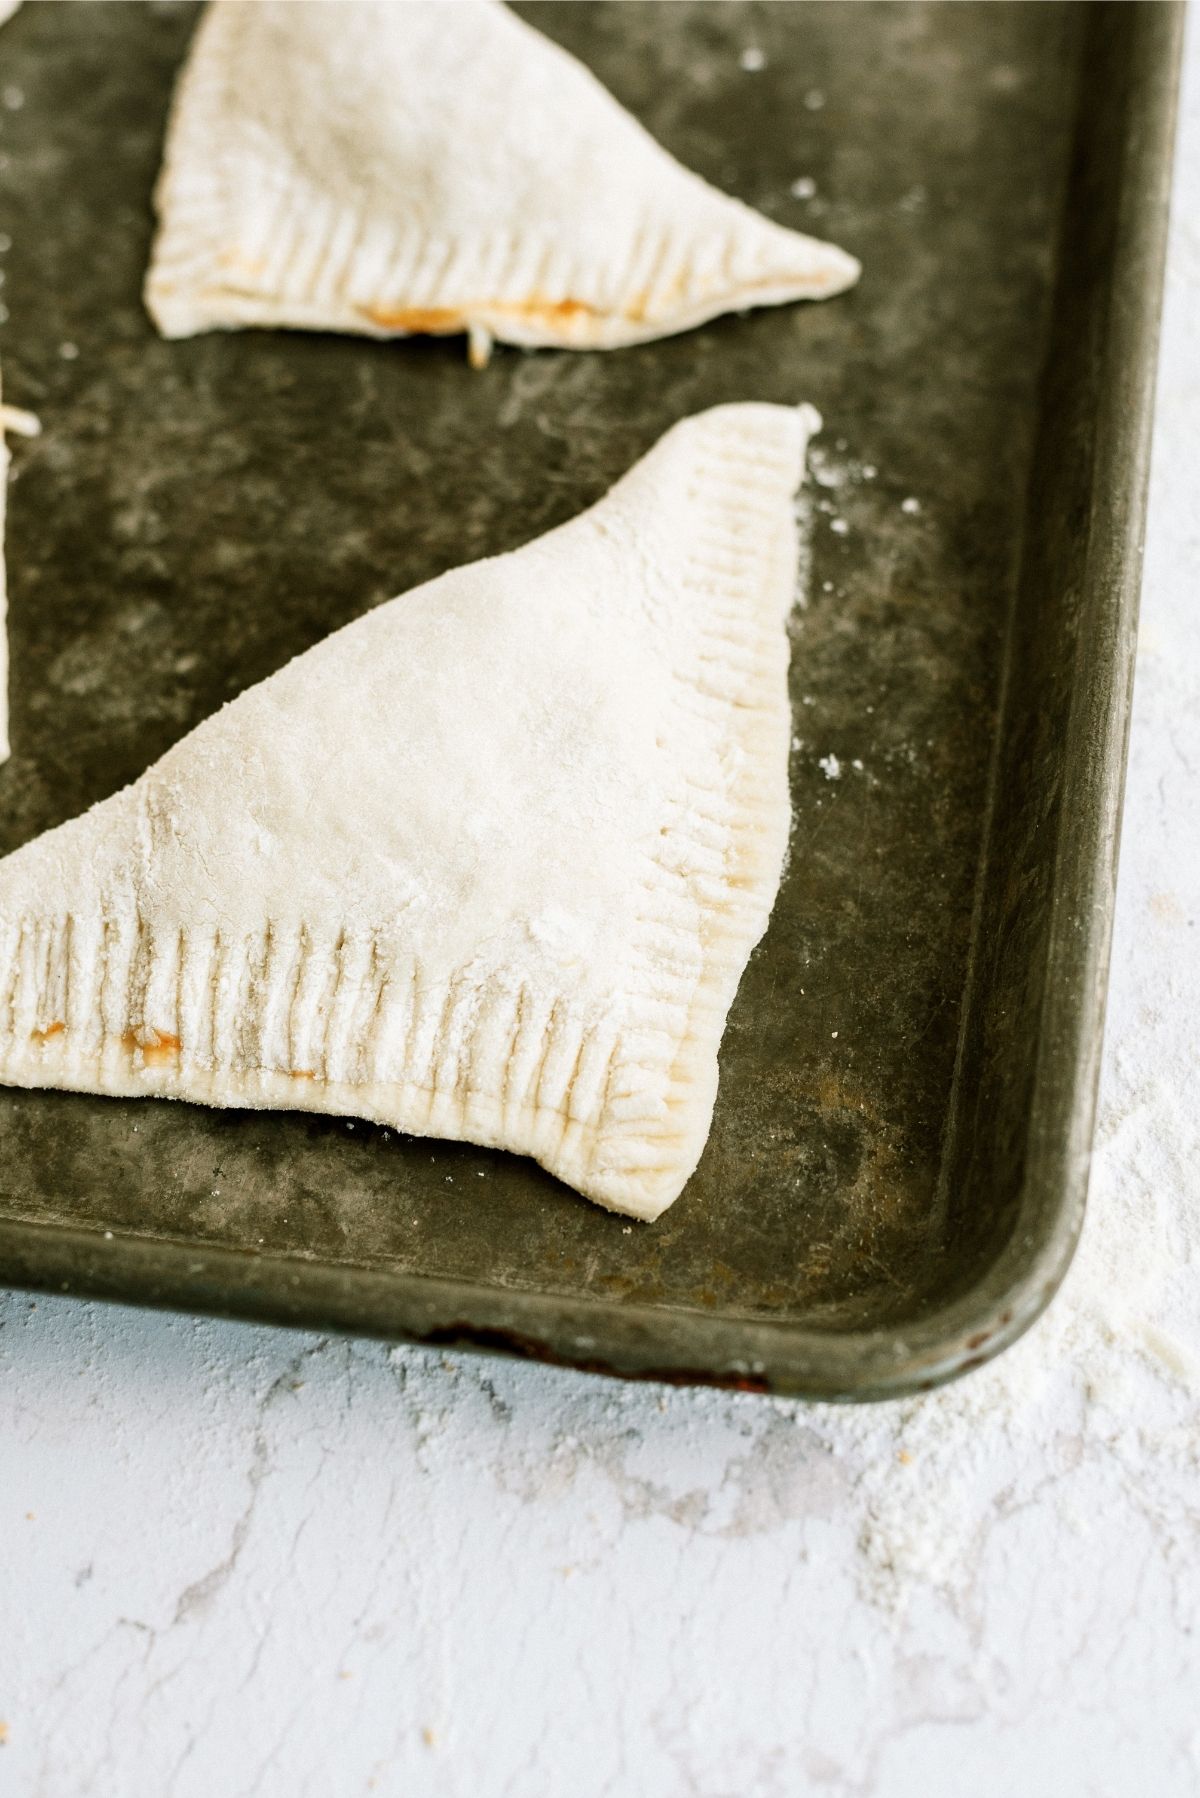 unbaked Quick and Easy Calzone on a Cookie Sheet